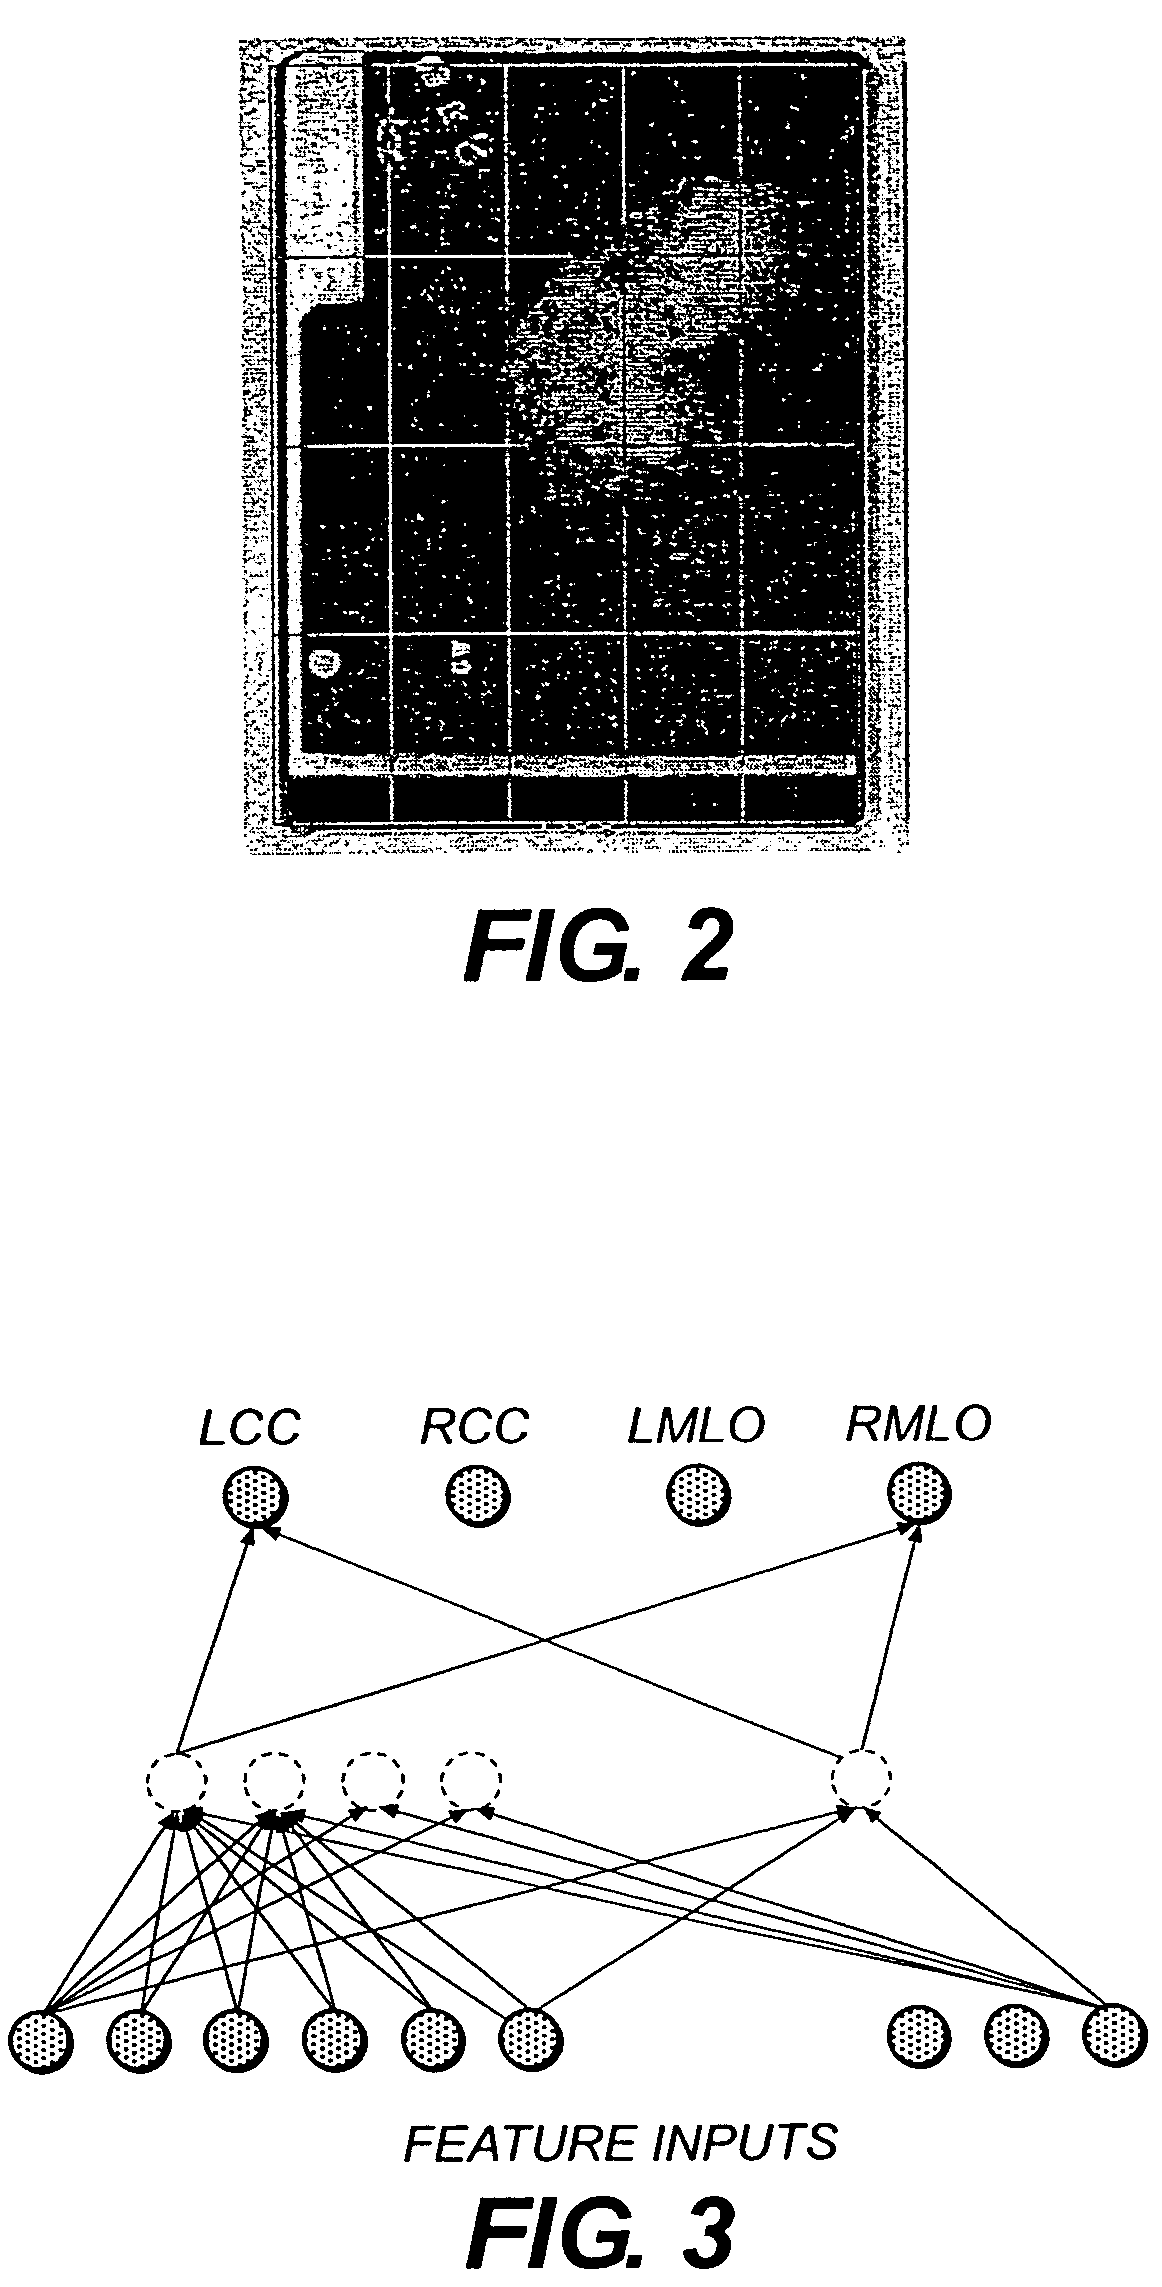 System and method for assigning mammographic view and laterality to individual images in groups of digitized mammograms